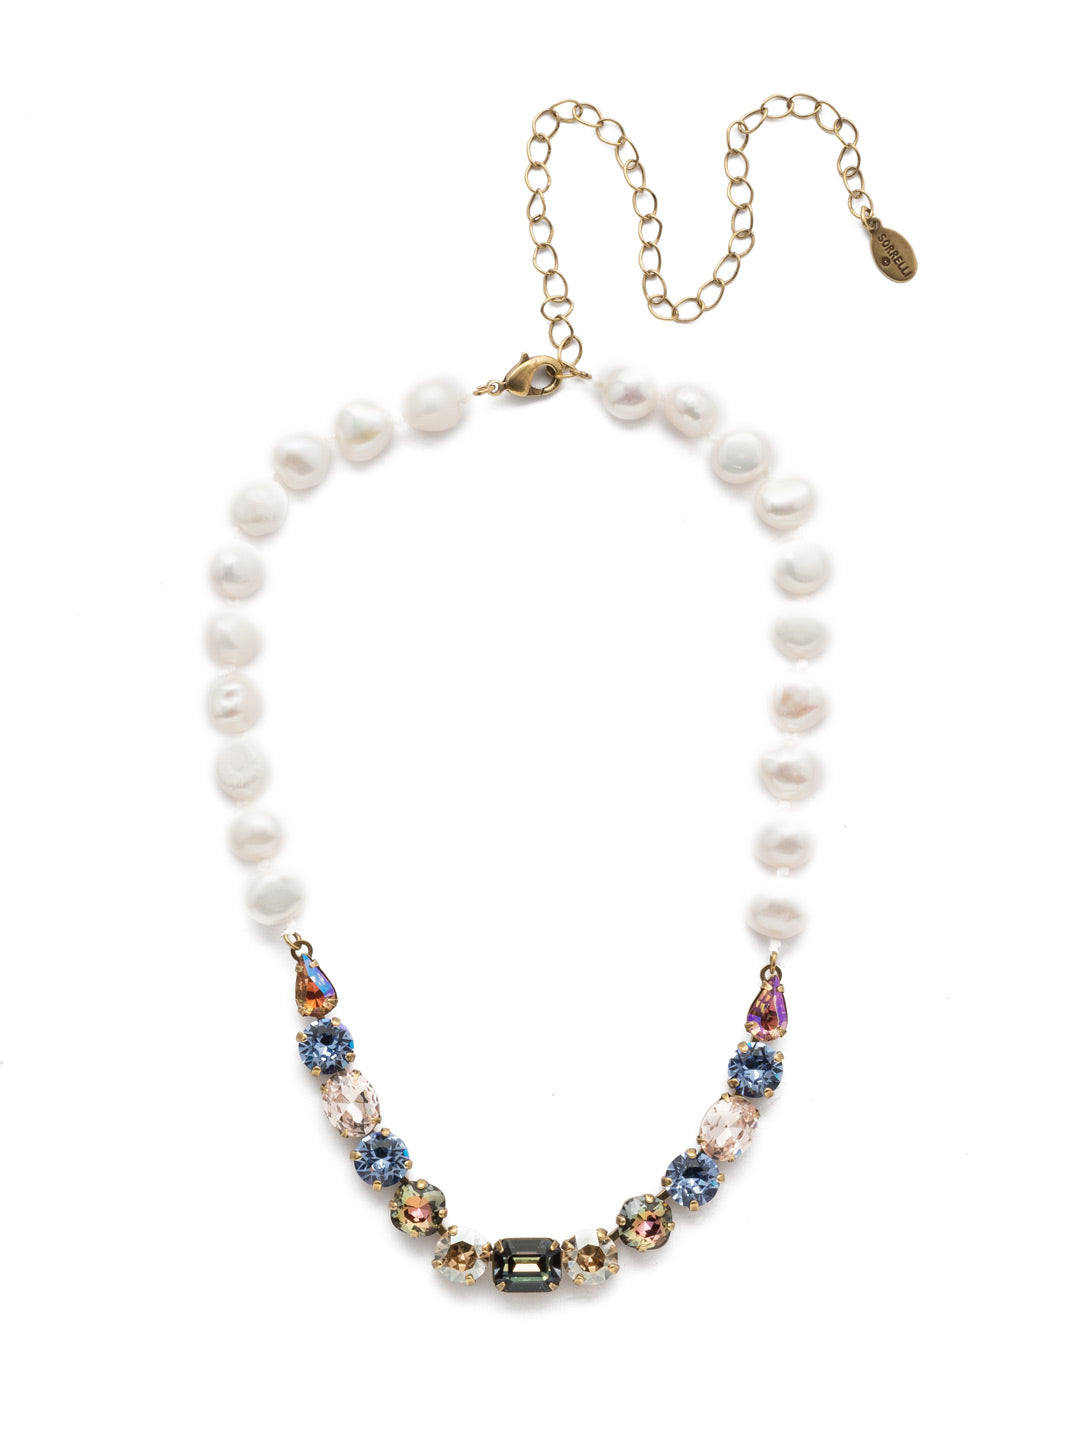 Cadenza Tennis Necklace - NEC14AGSDE - This classic beauty features a chain of wire-wrapped freshwater pearls supporting a delicate pattern of crystal shapes at its base. From Sorrelli's Selvedge Denim collection in our Antique Gold-tone finish.